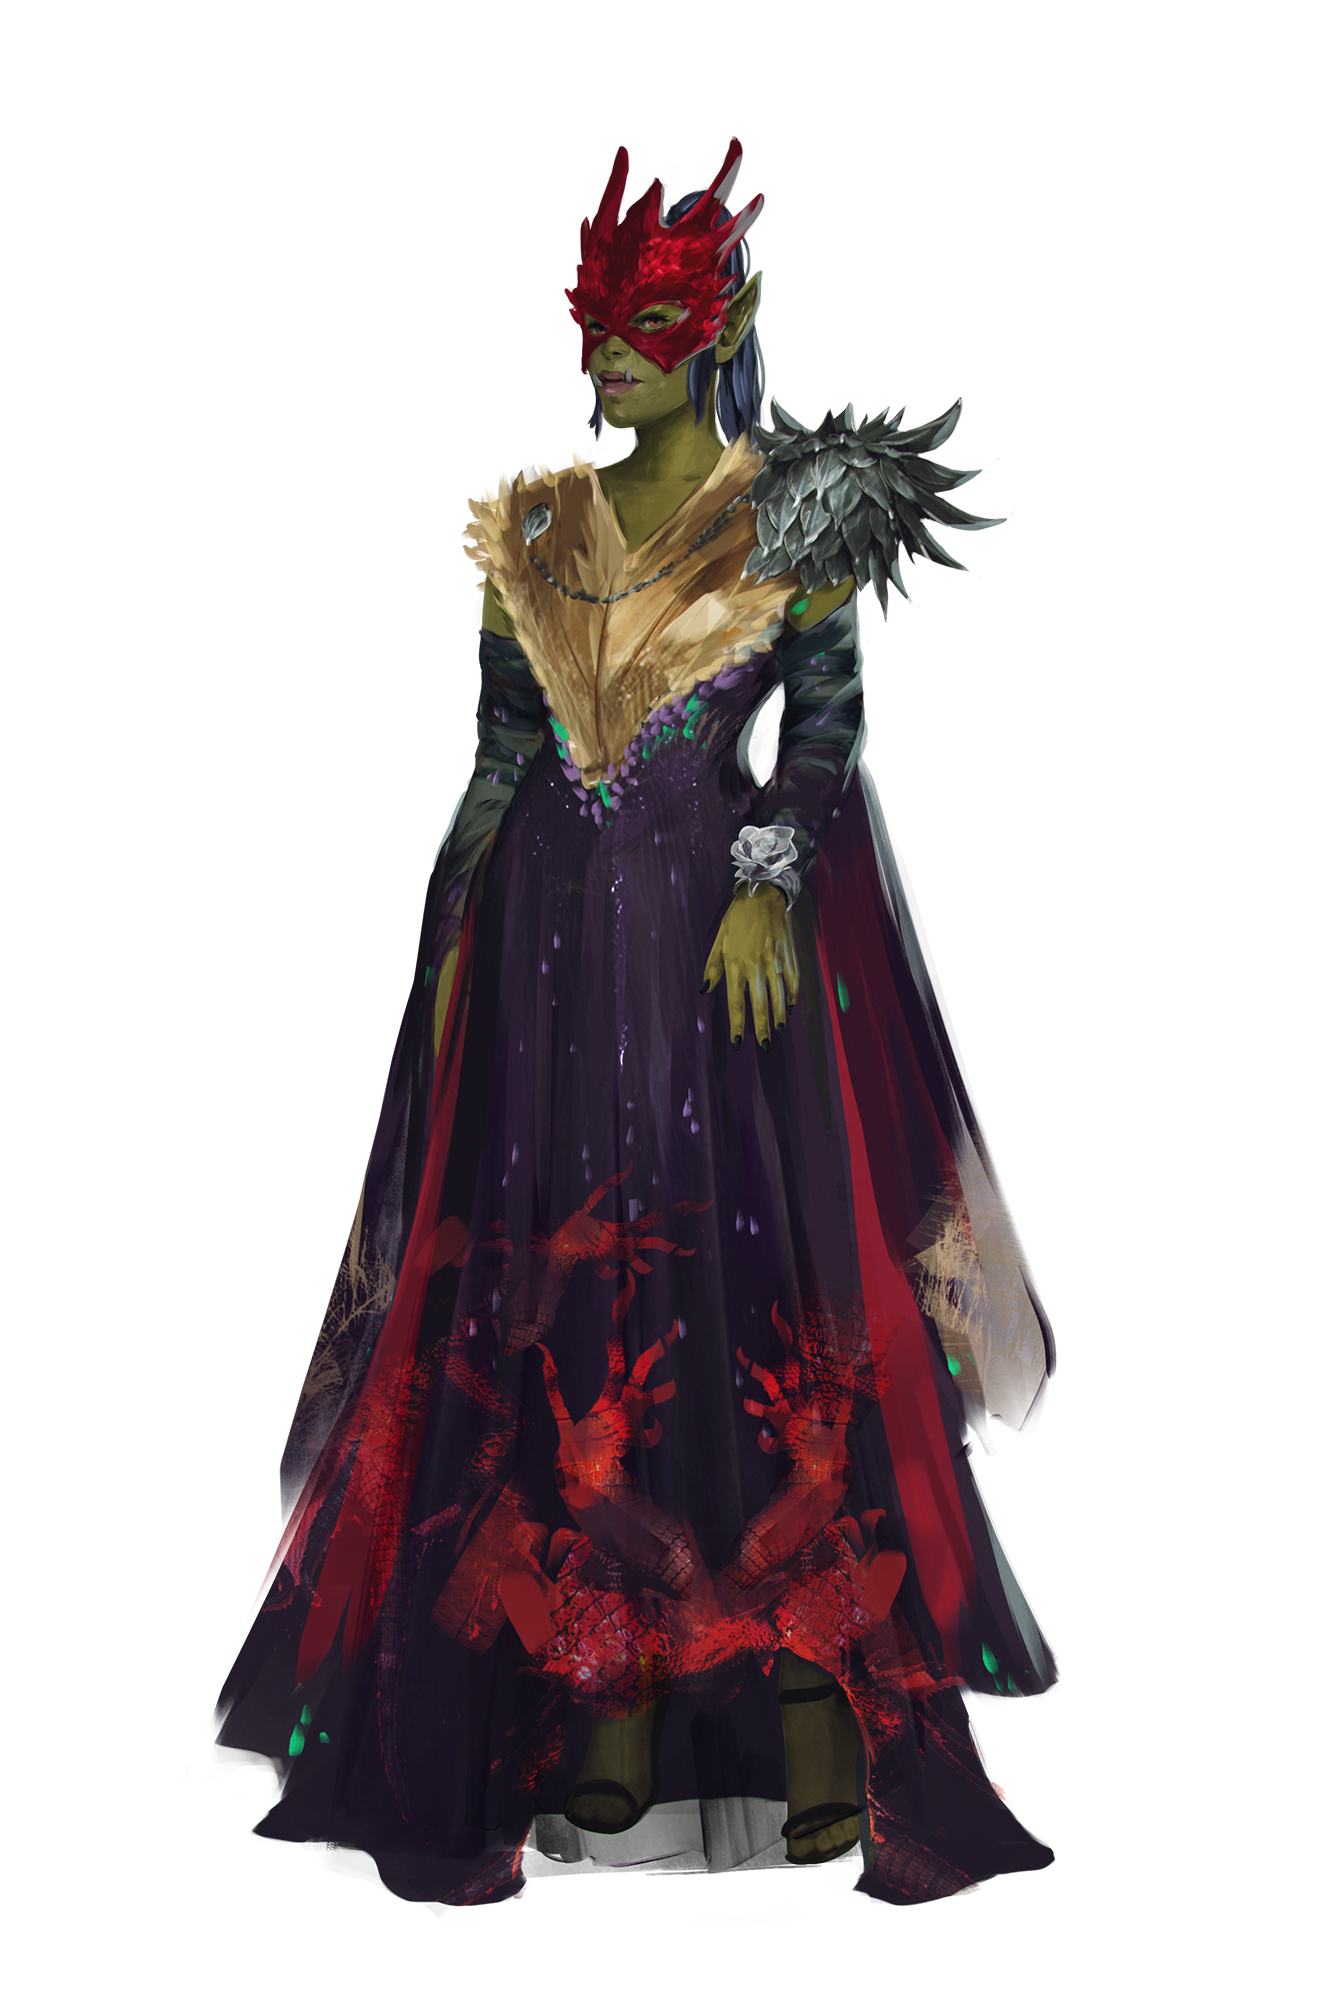 A half-orc celebrant of Allbirth. She’s dressed in an elegant dress with a bloodstain pattern across the bottom and is wearing an elaborate mask.